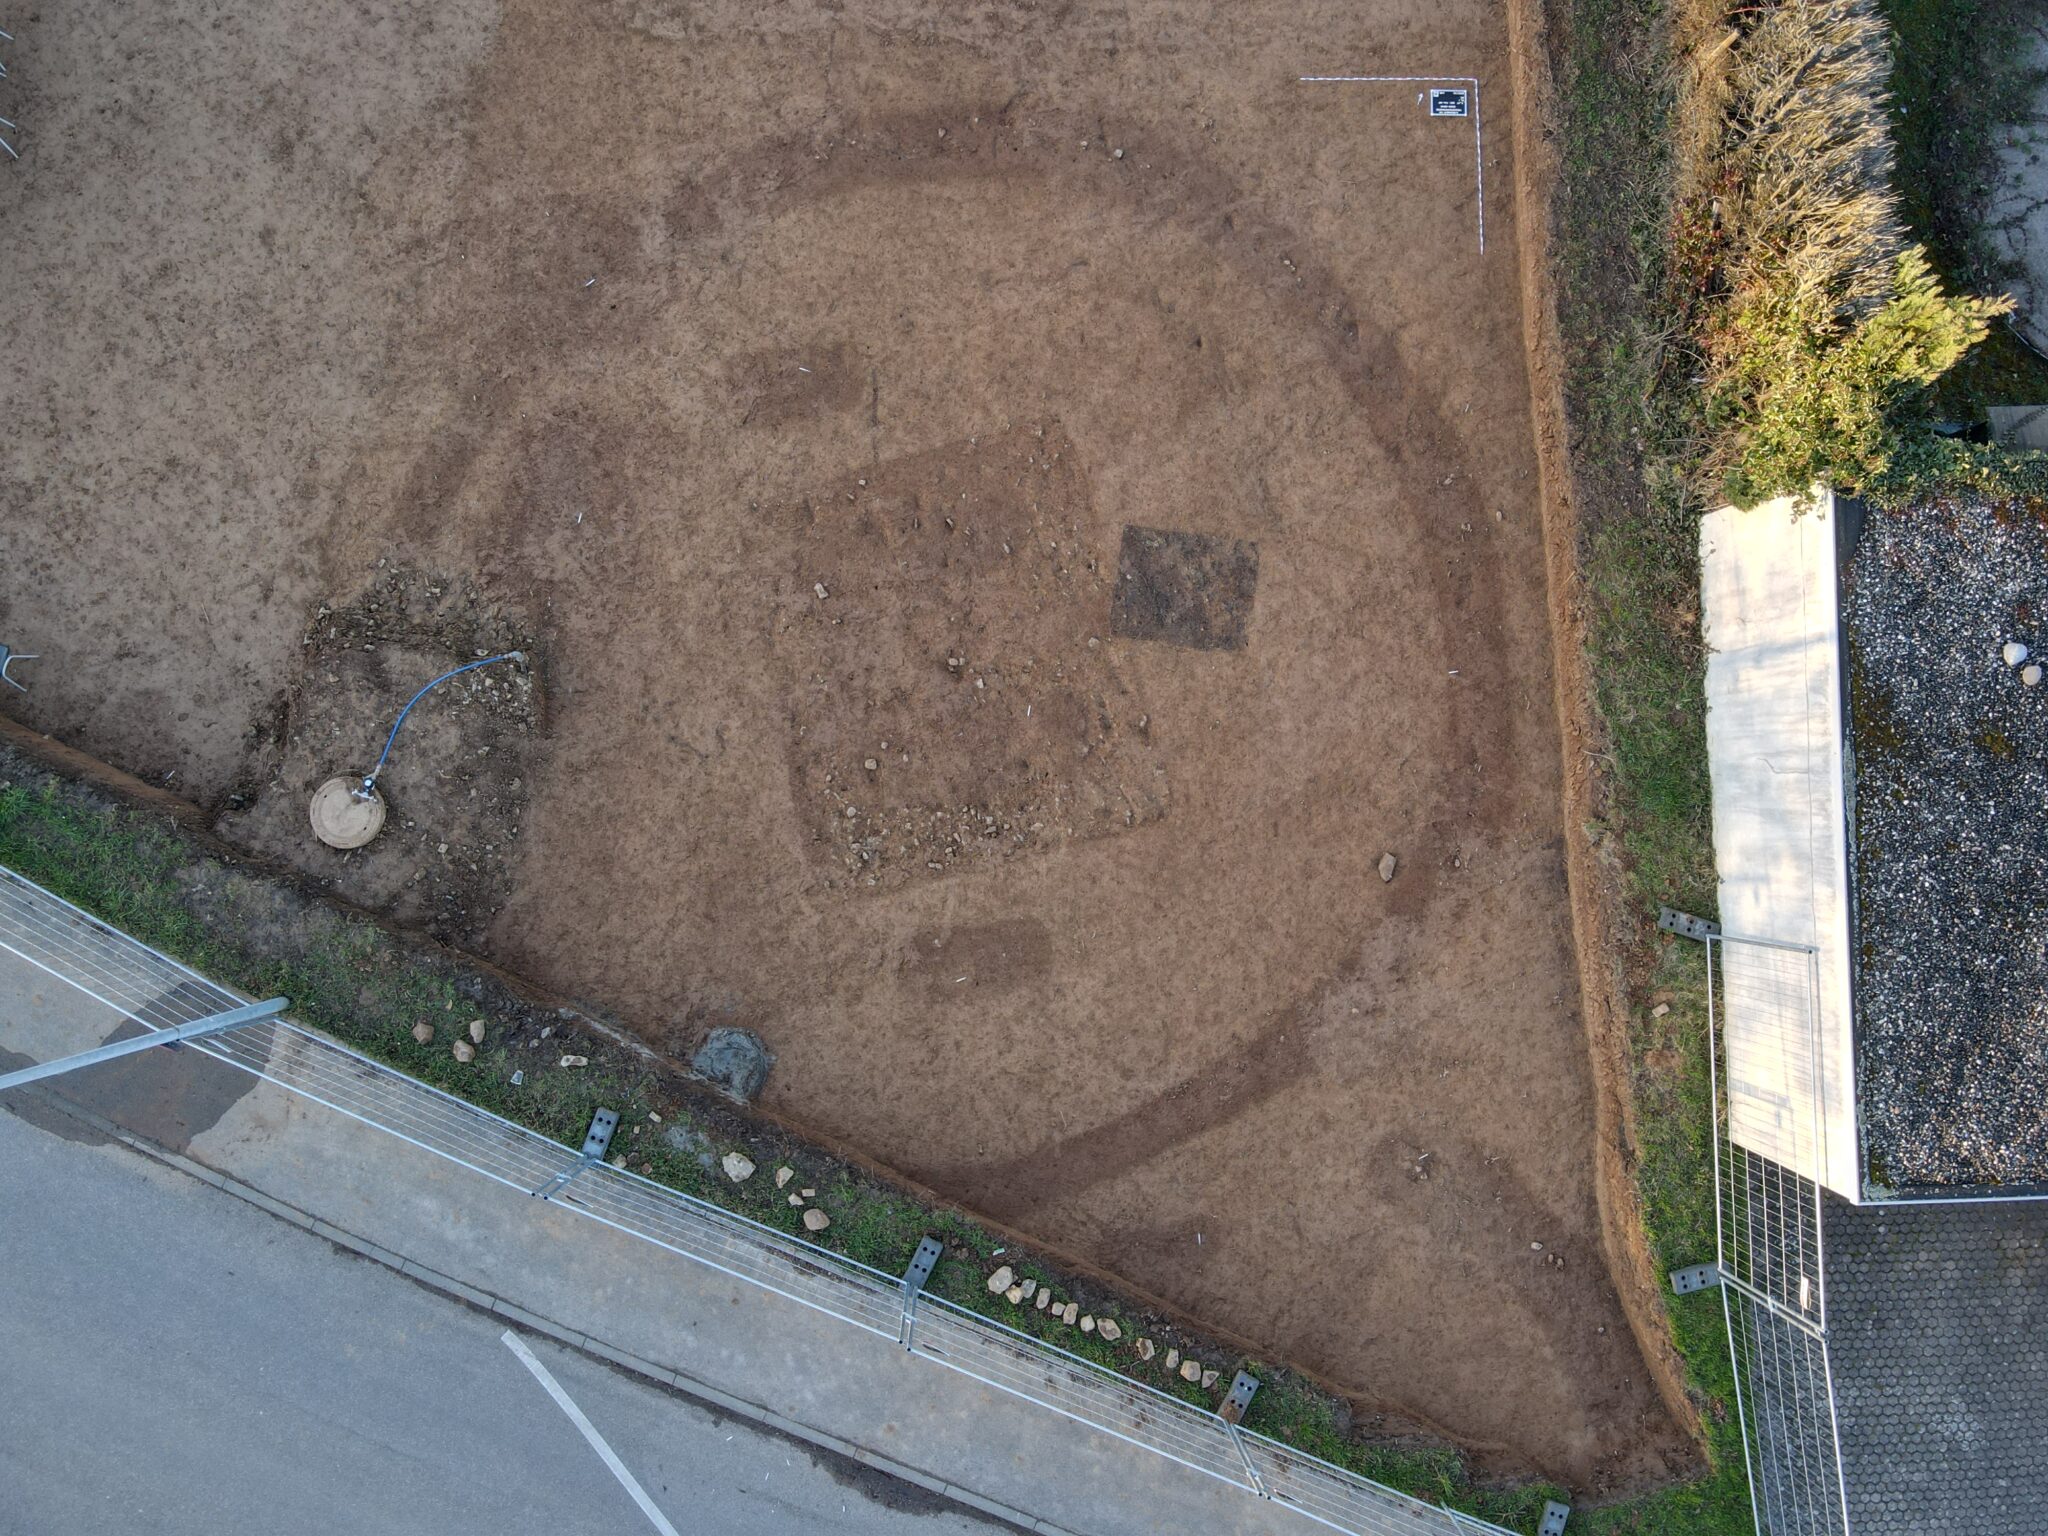 Suprise medieval double grave found inside circular ditch